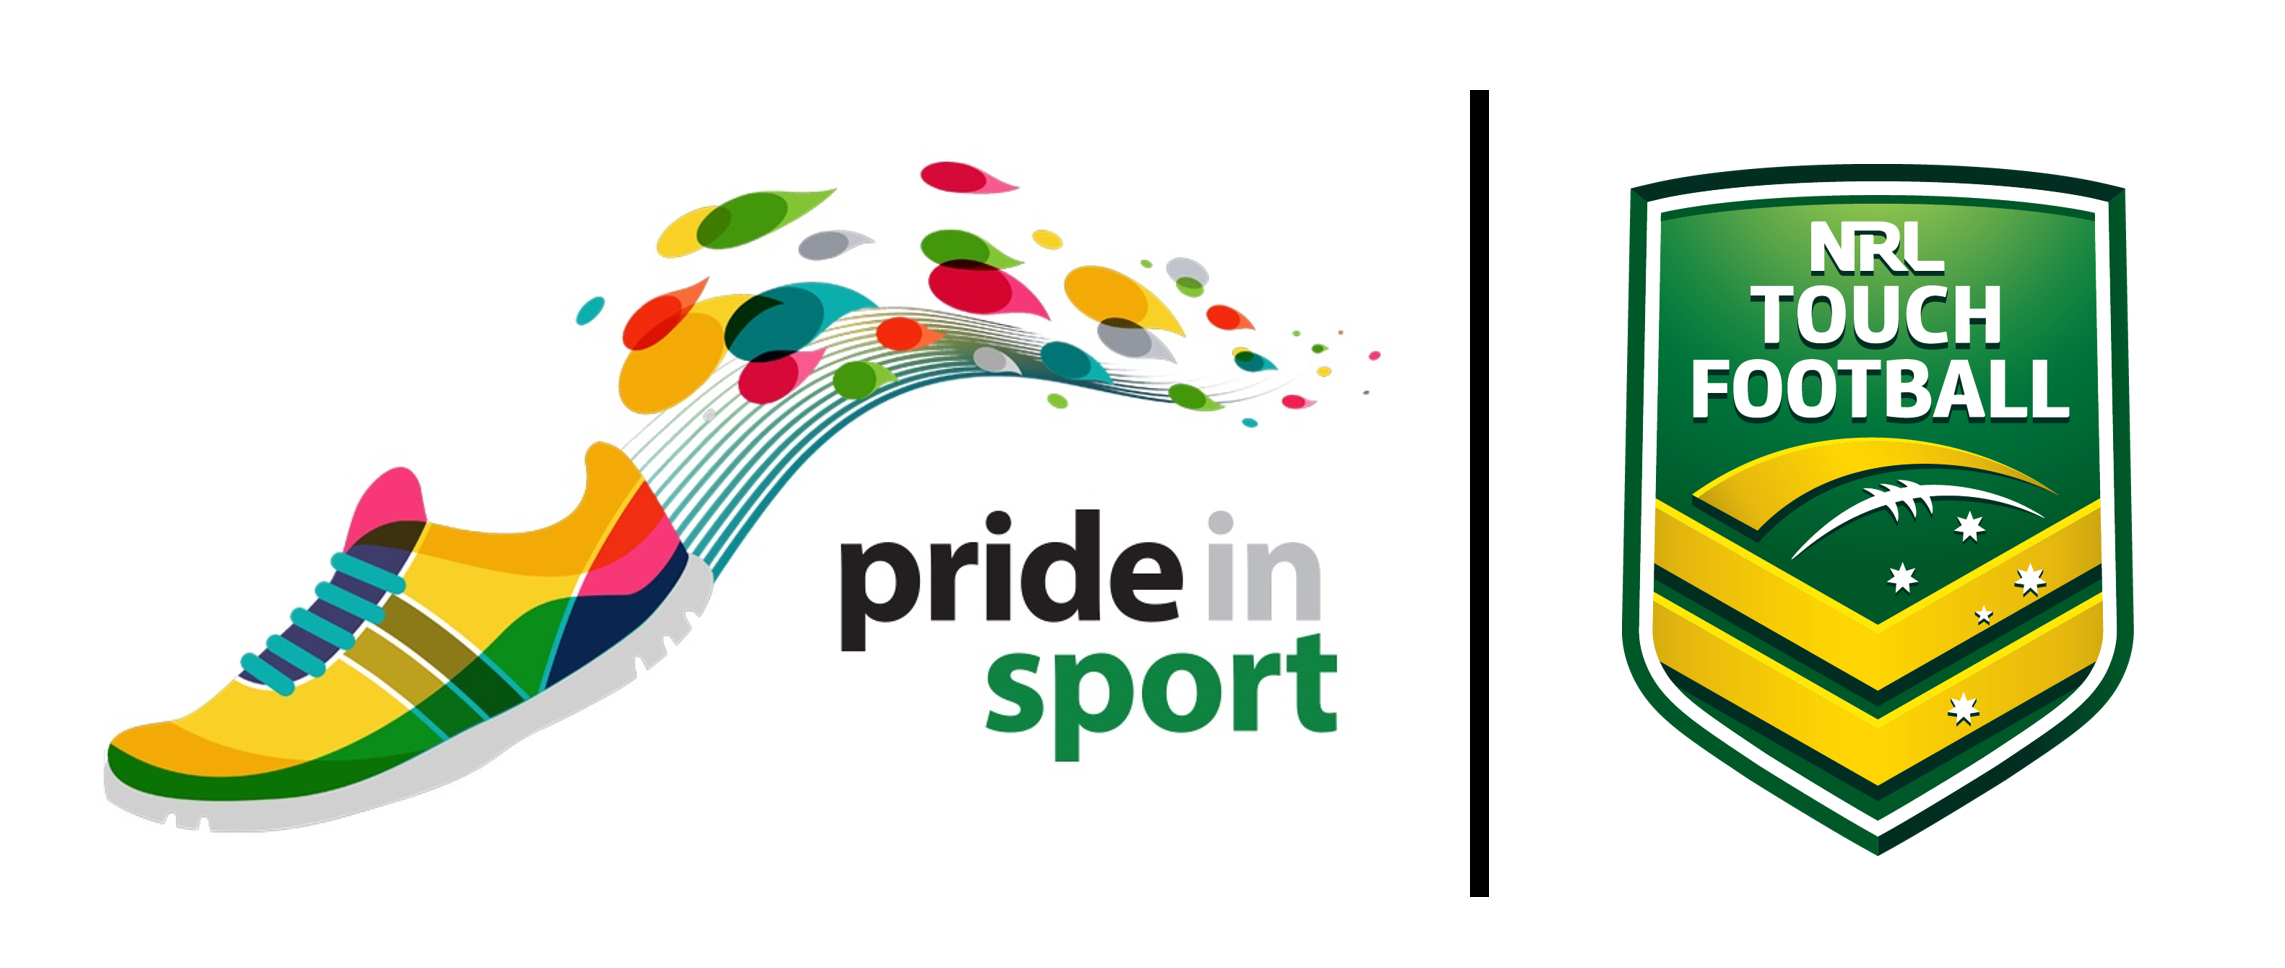 nrl touch and pride in sport partnership